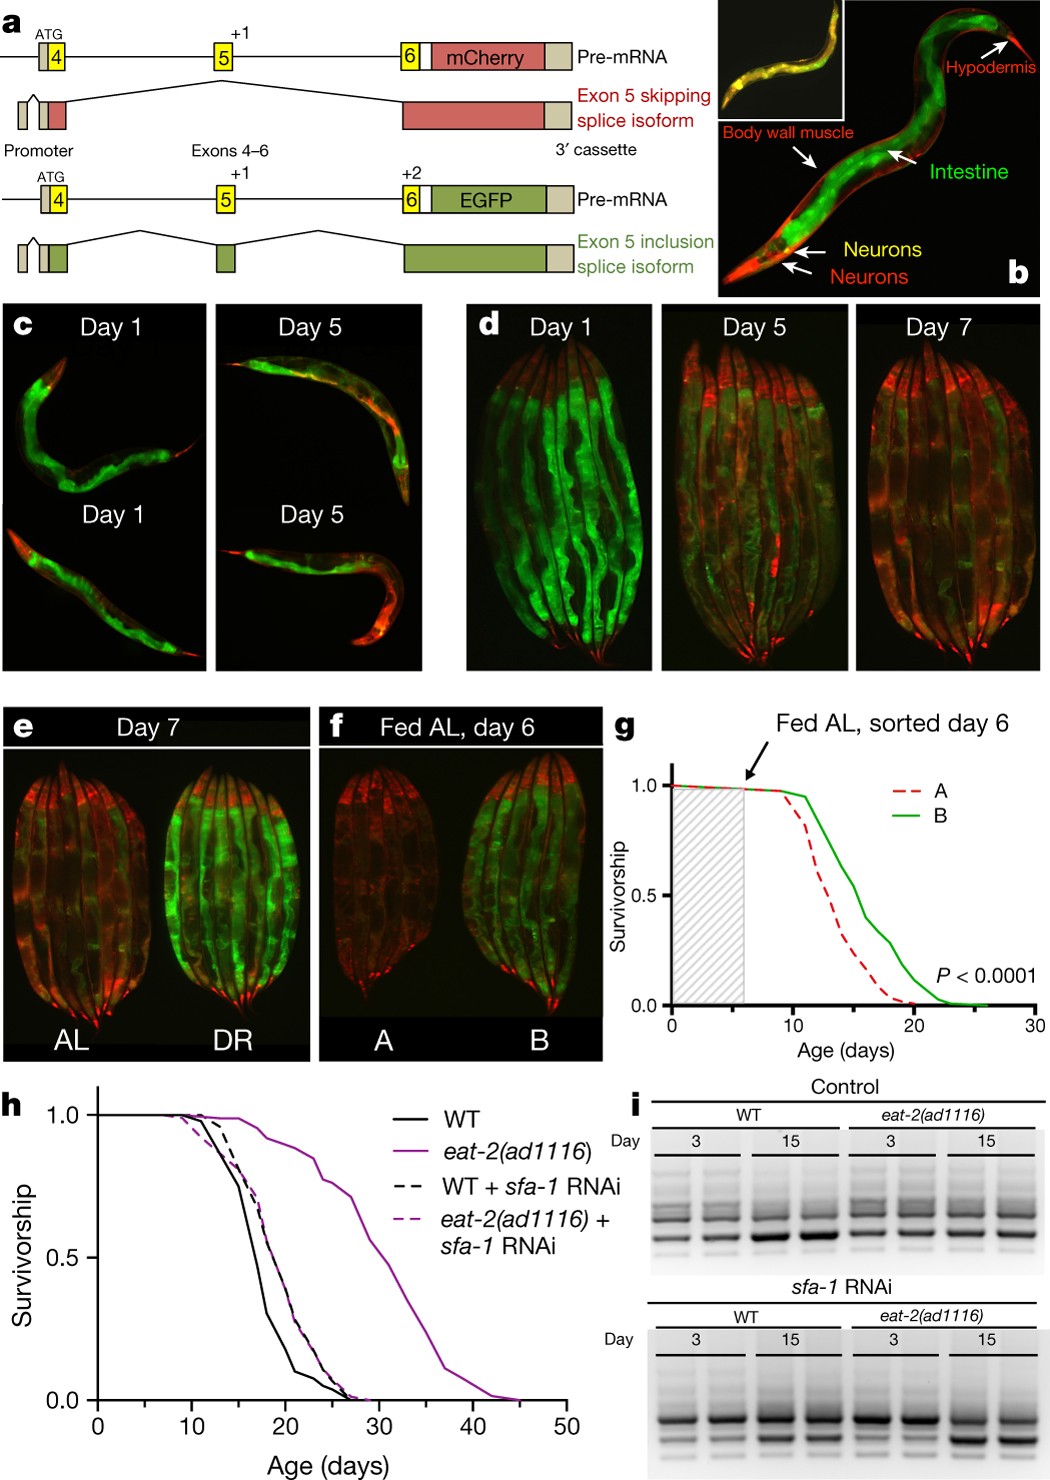 Splicing factor 1 modulates dietary restriction and TORC1 pathway longevity  in C. elegans | Nature